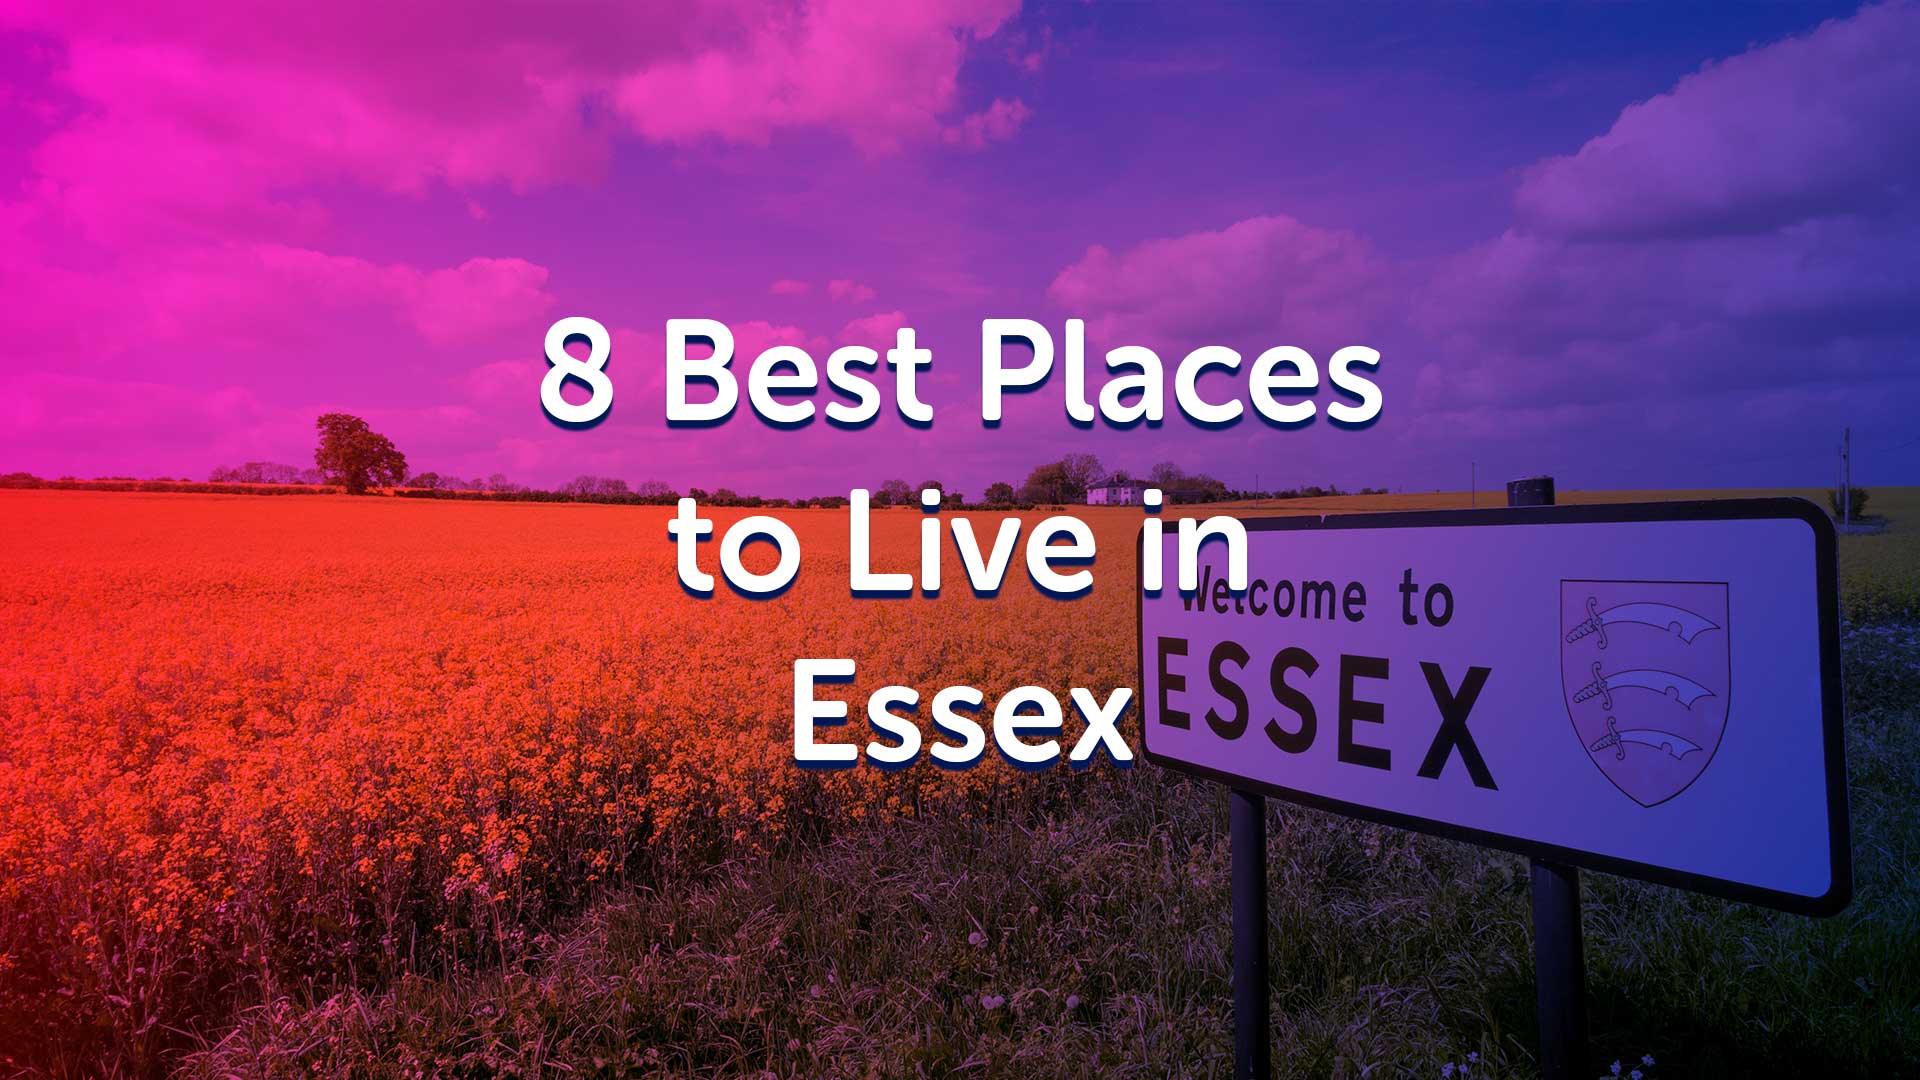 8 Best Places to Live in Essex